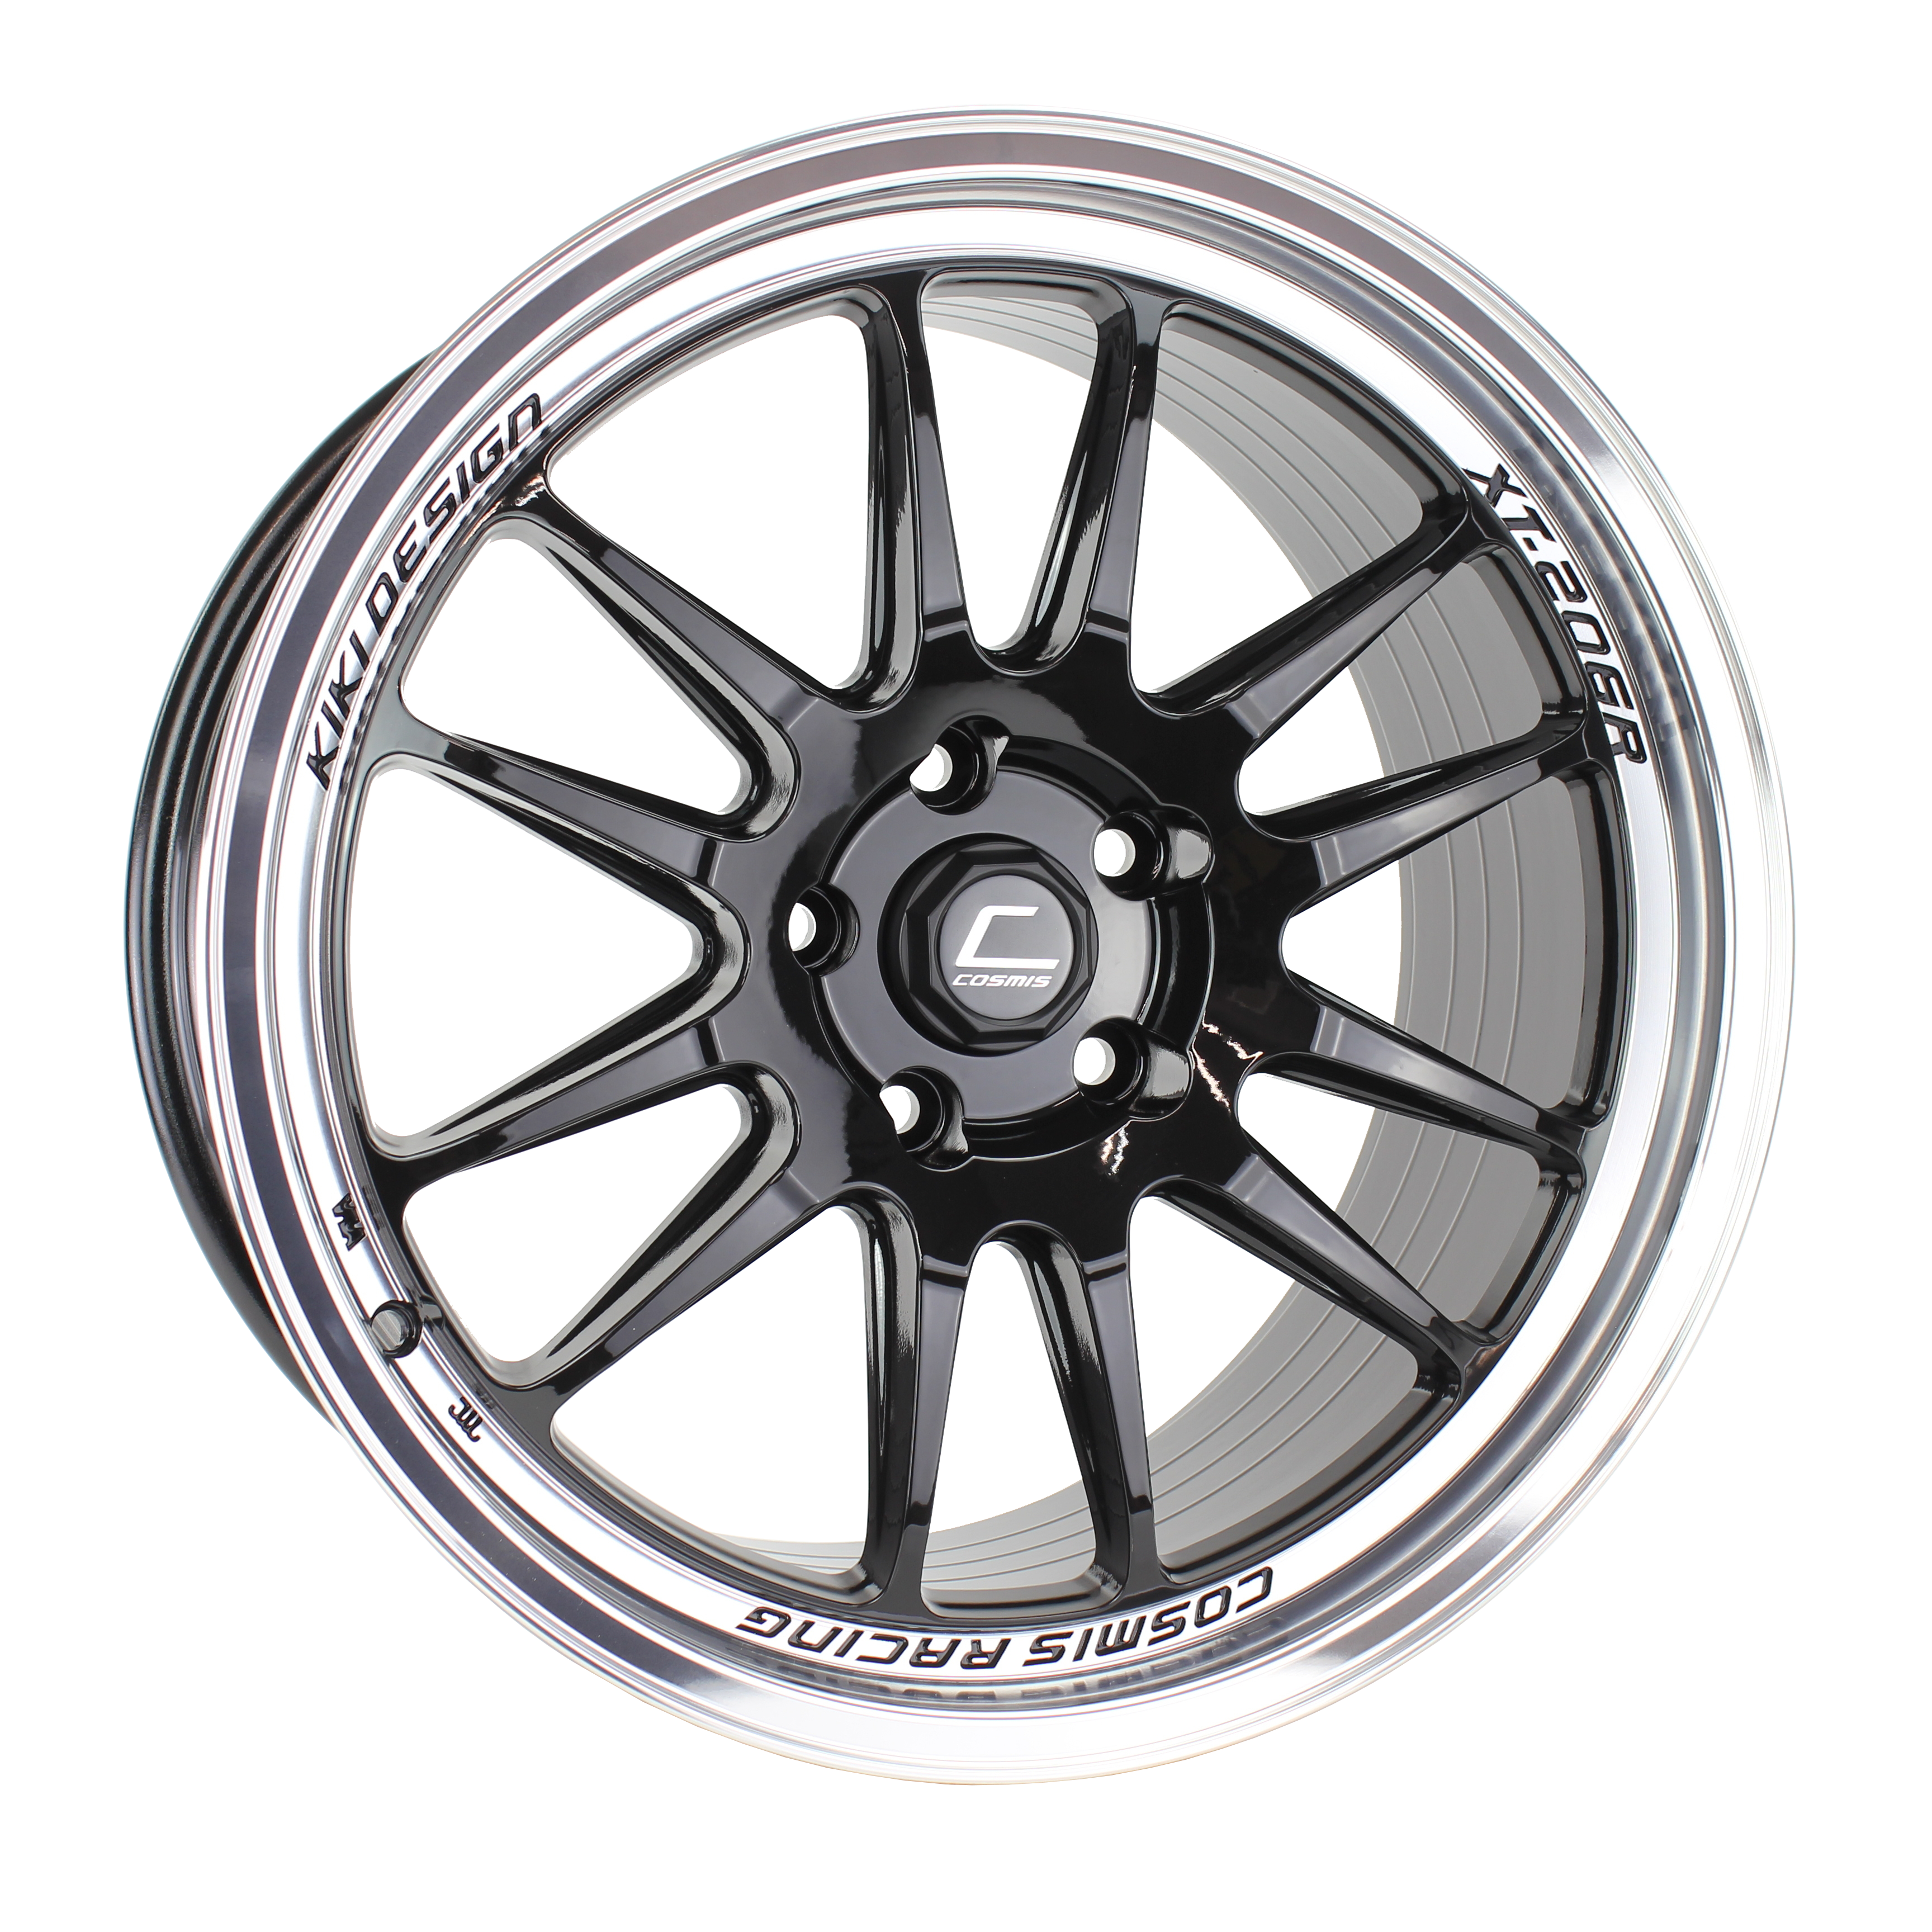 Cosmis Racing Xt206r's, and Continental Extreme Contacts